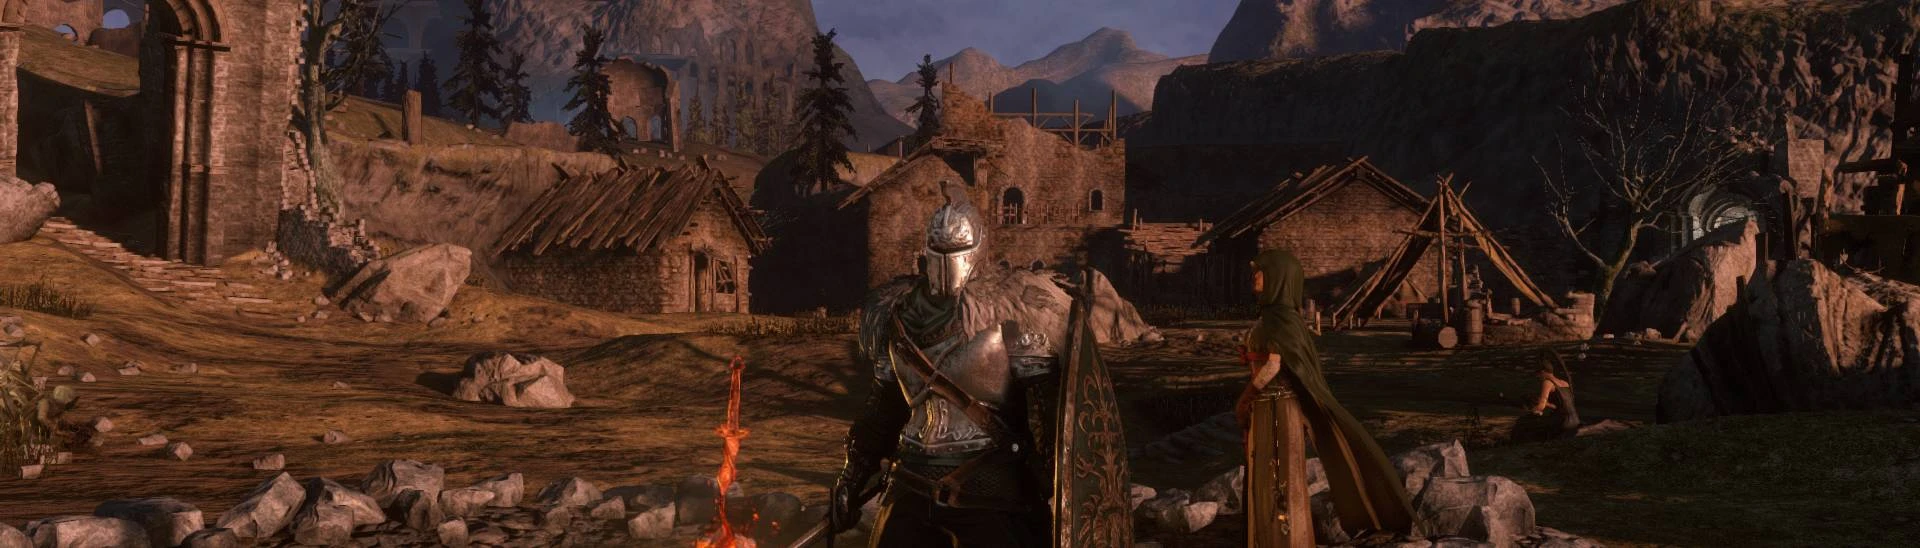 Dark Souls 2 Mod Dramatically Improves The Game's Lighting And